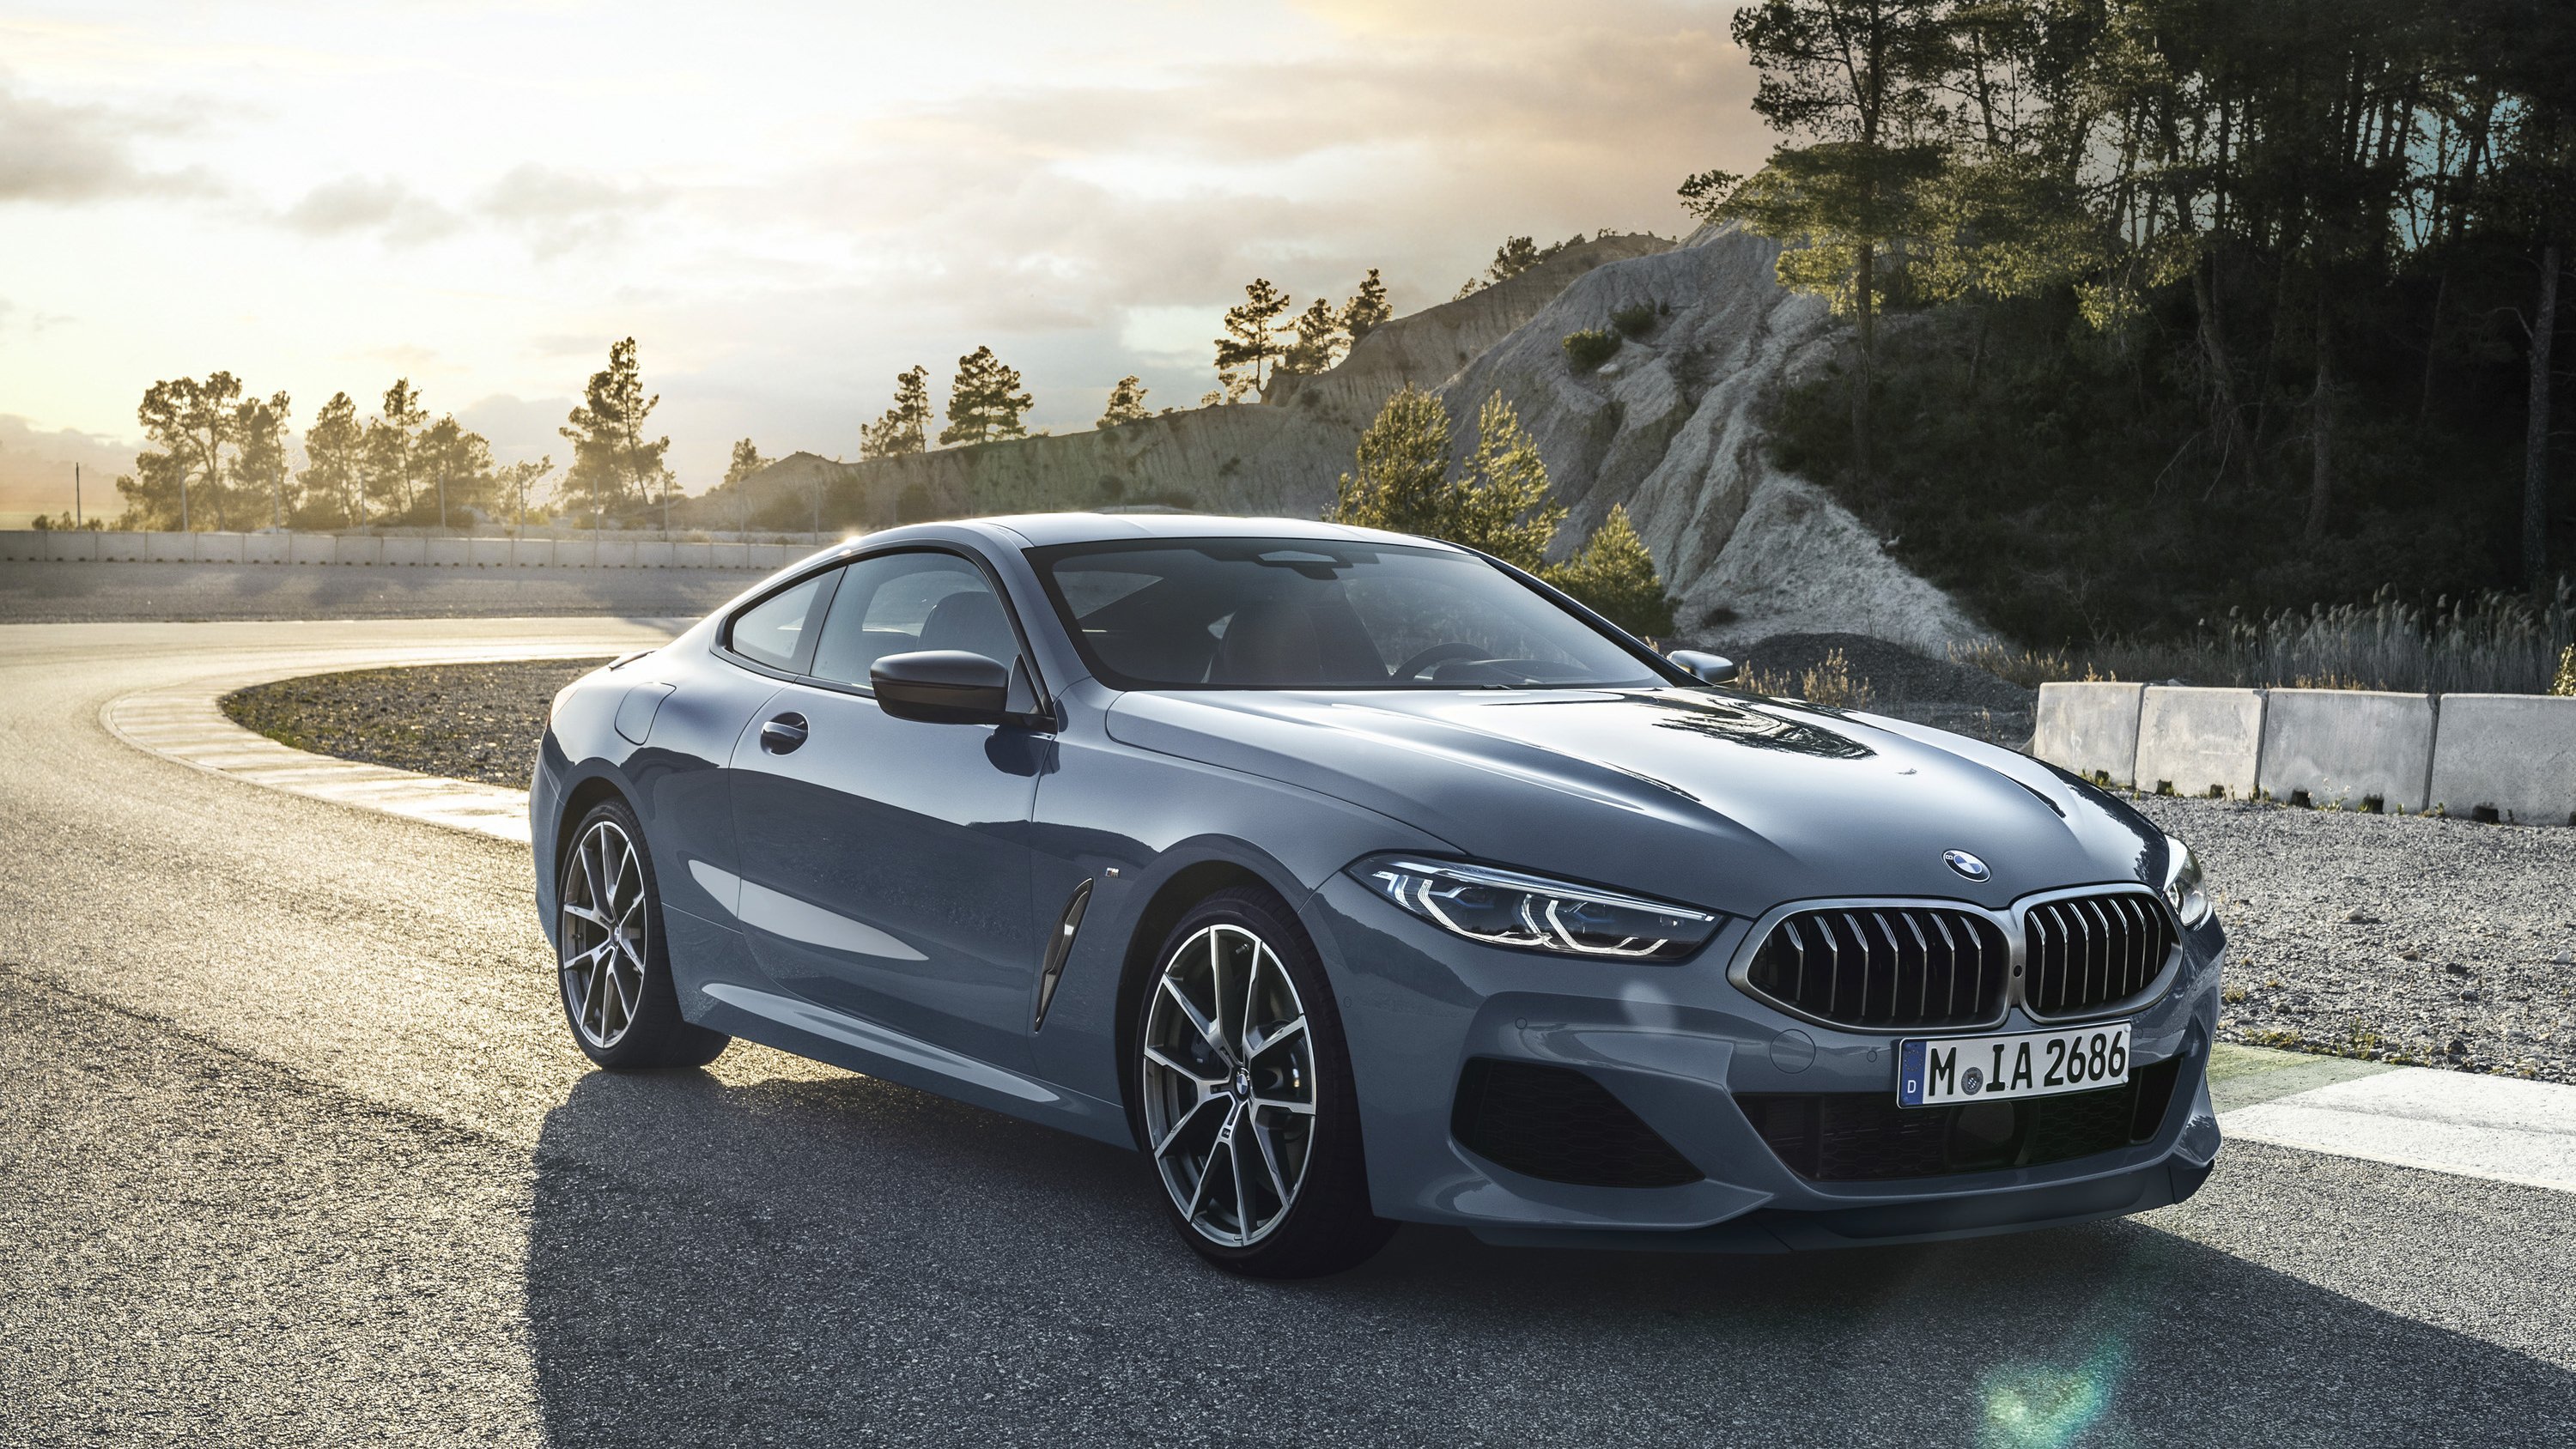 BMW 8 Series Picture, Photo, Wallpaper